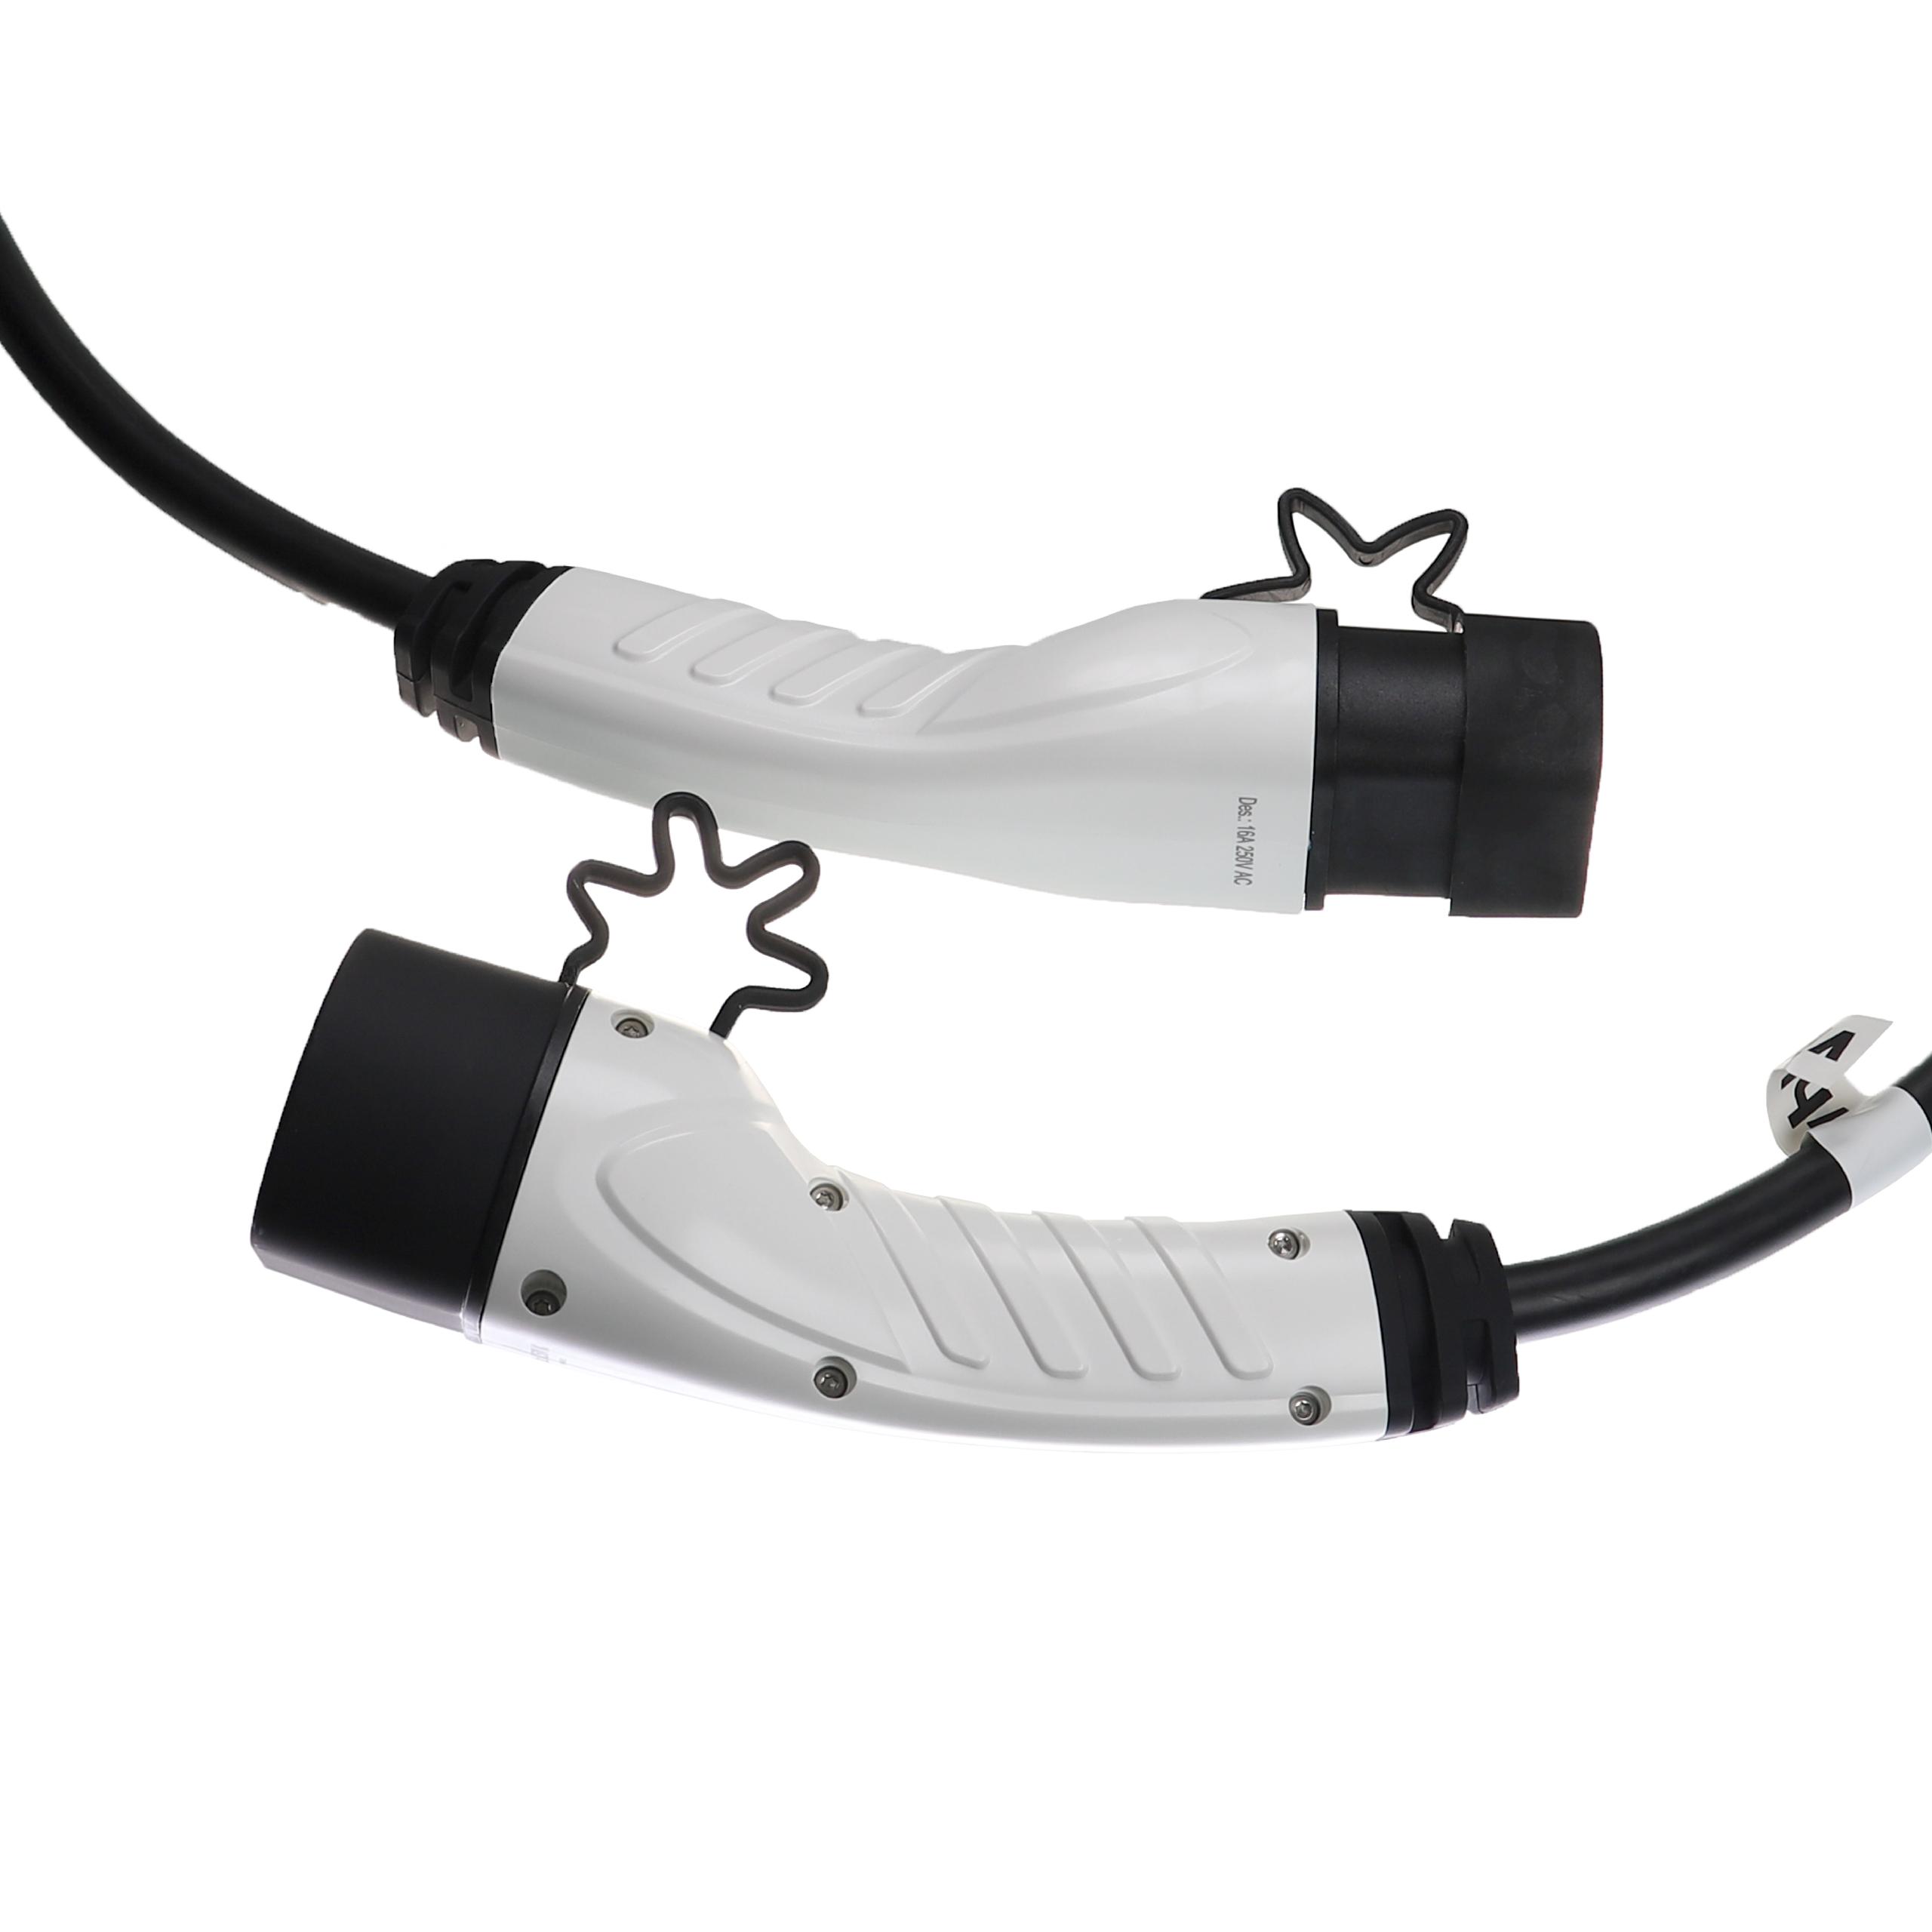 Charging Cable for Electric Car, Plug-In Hybrid - Type 2 to Type 2 Cable, Single-Phase, 16 A, 3.5 kW, 10 m